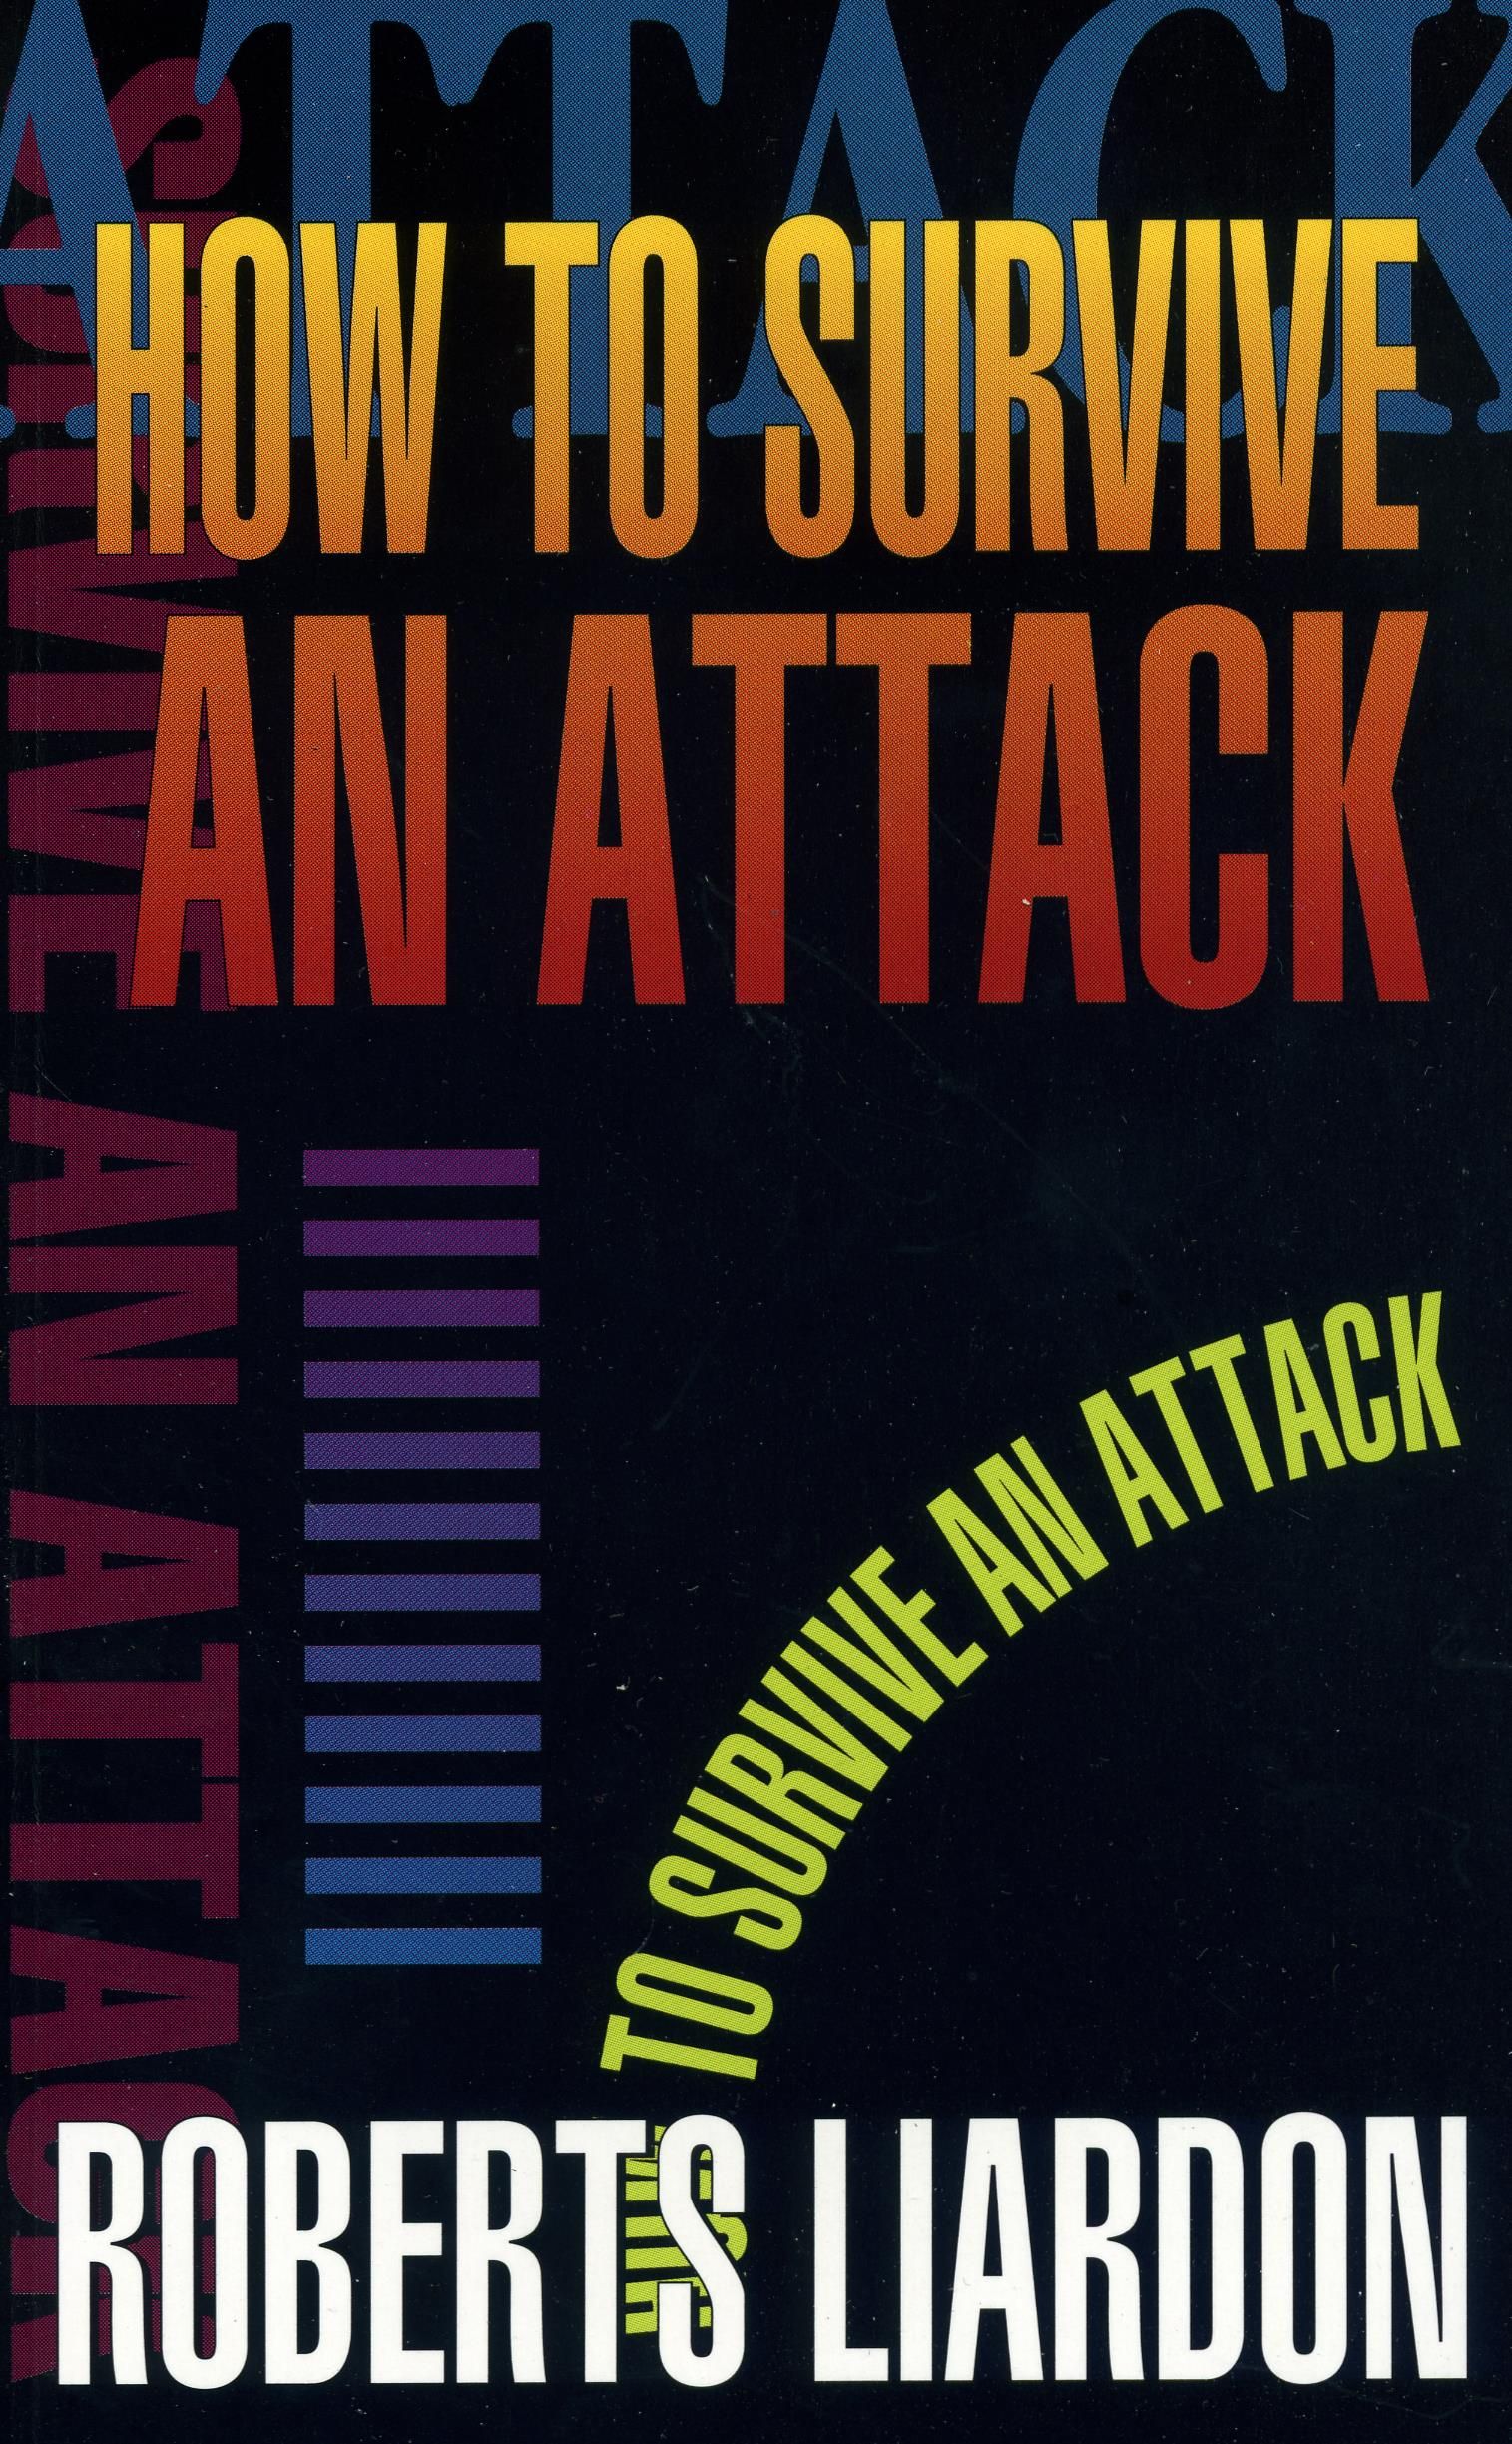 Roberts Liardon: How to Survive an Attack